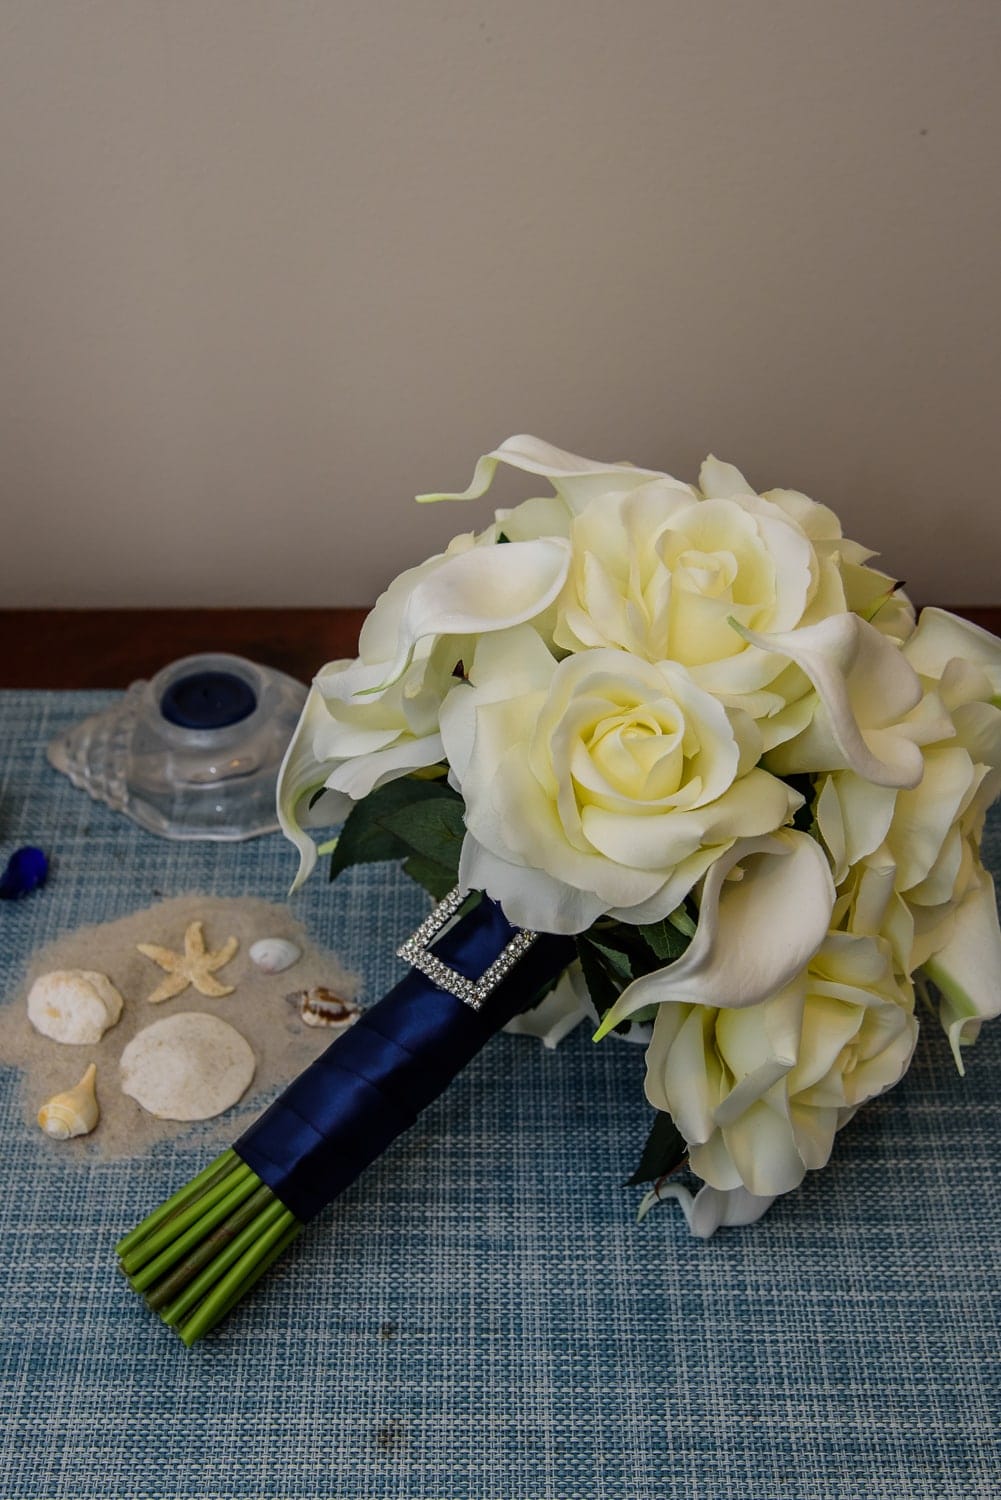 An ivory rose bridal wedding bouquet with navy accents.